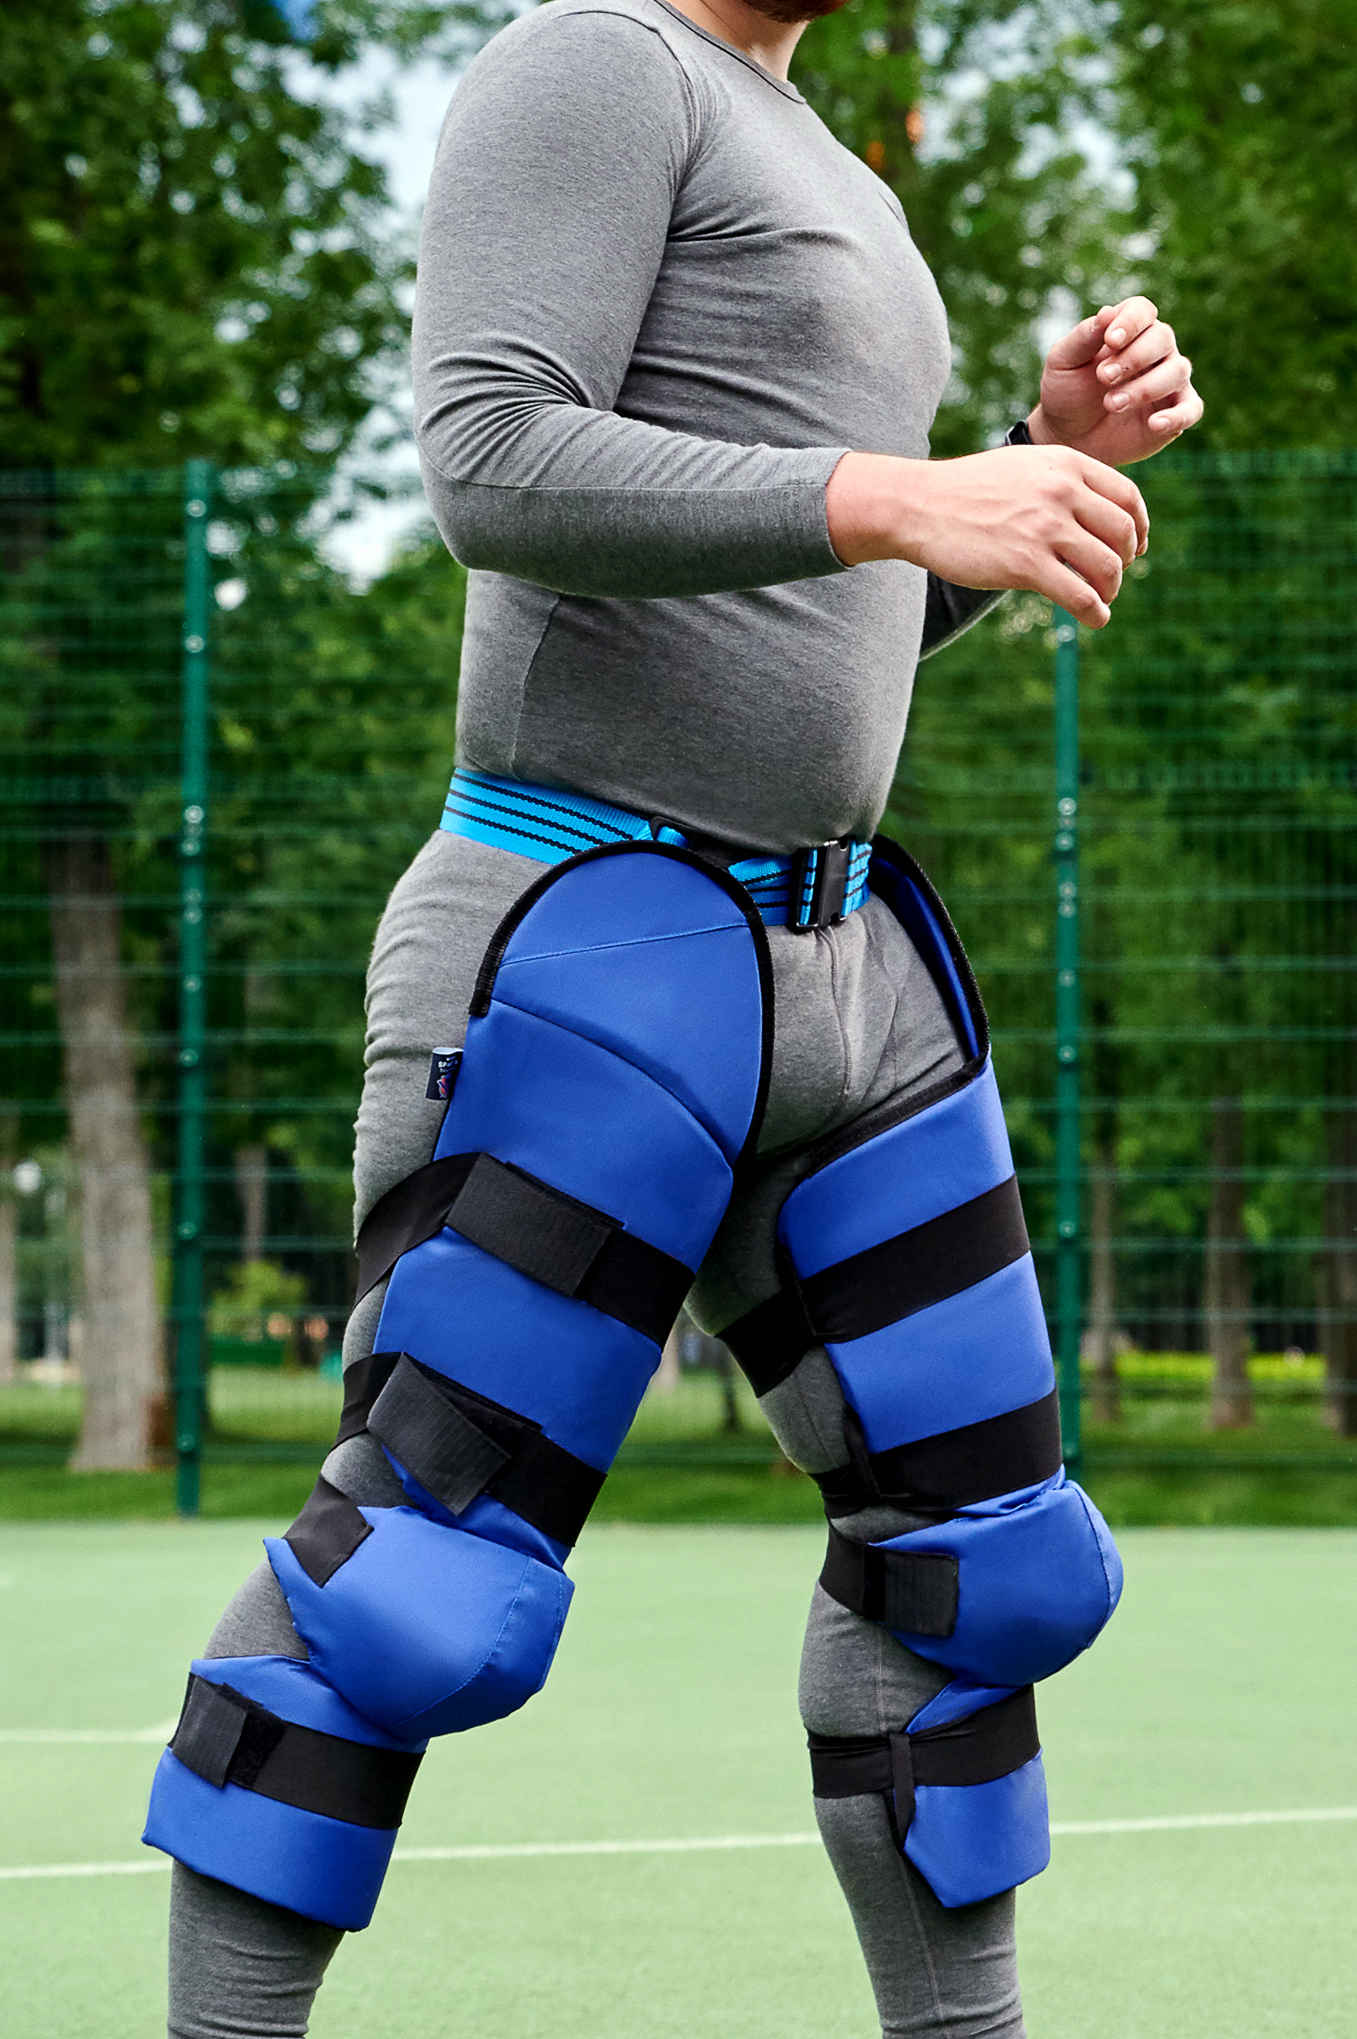 ¾ Leg Protection With Extra Security And Fastening Belt